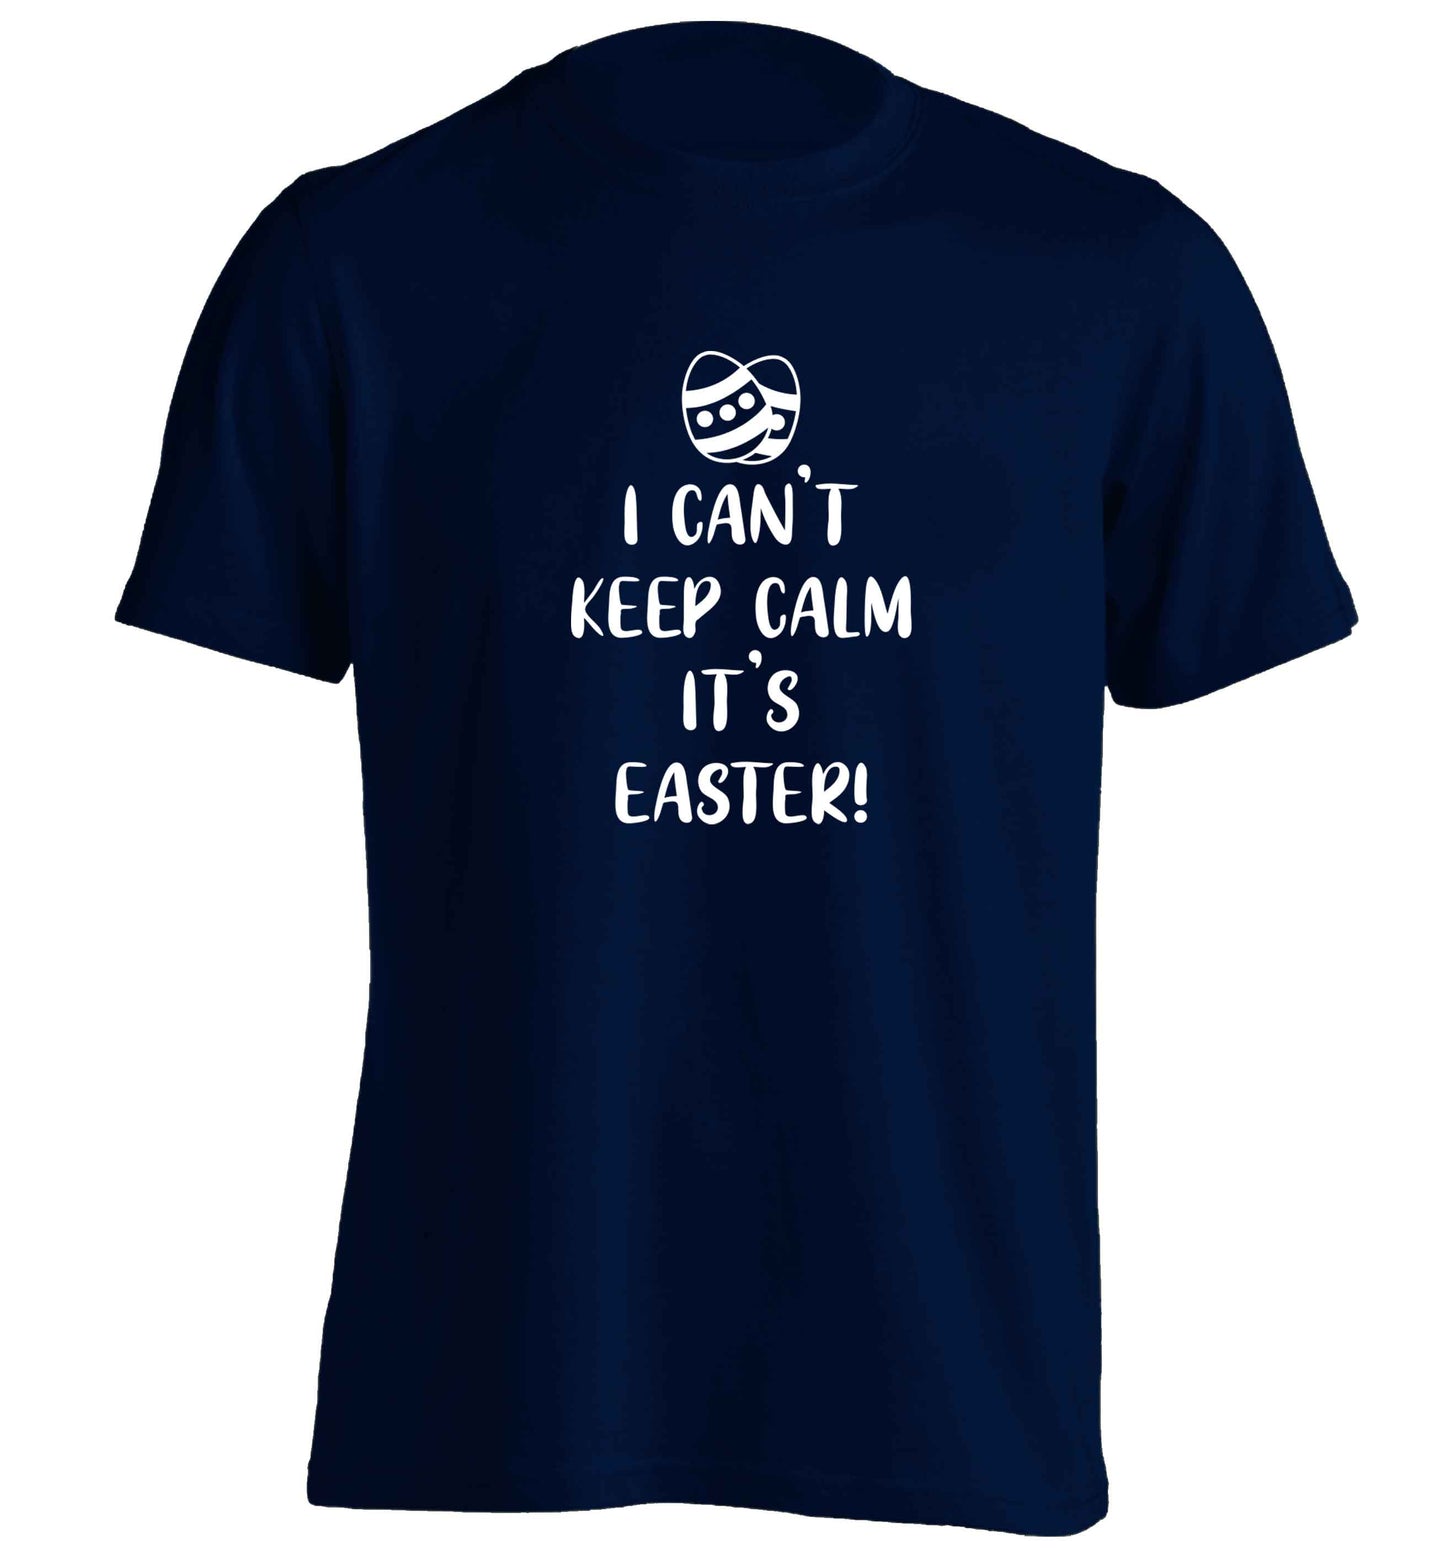 I can't keep calm it's Easter adults unisex navy Tshirt 2XL